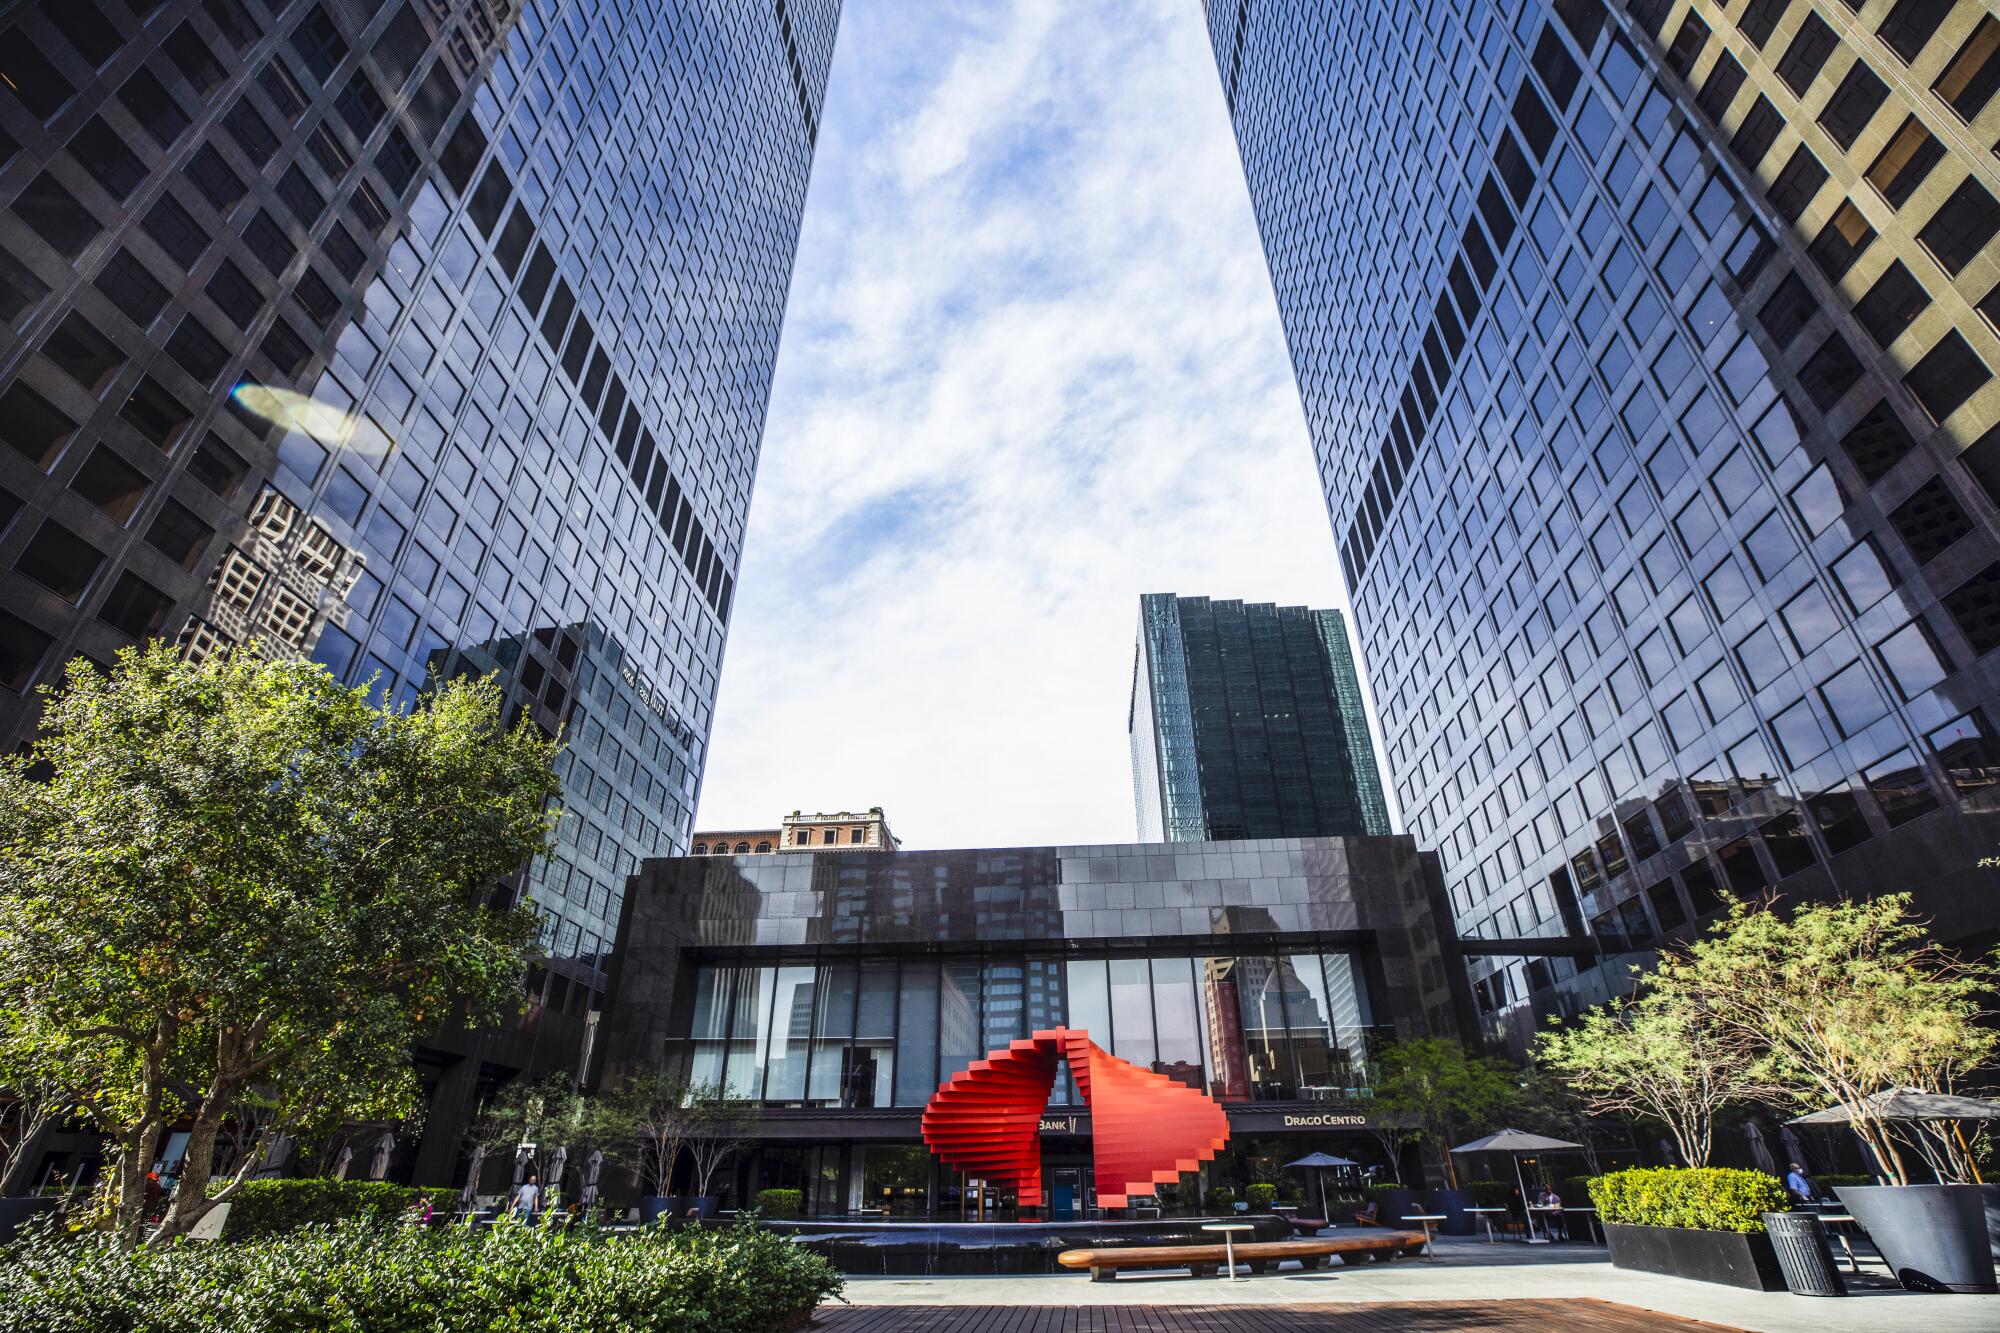 City National Plaza designed by A.C. Martin & Associates features two 52-story polished-granite office towers.